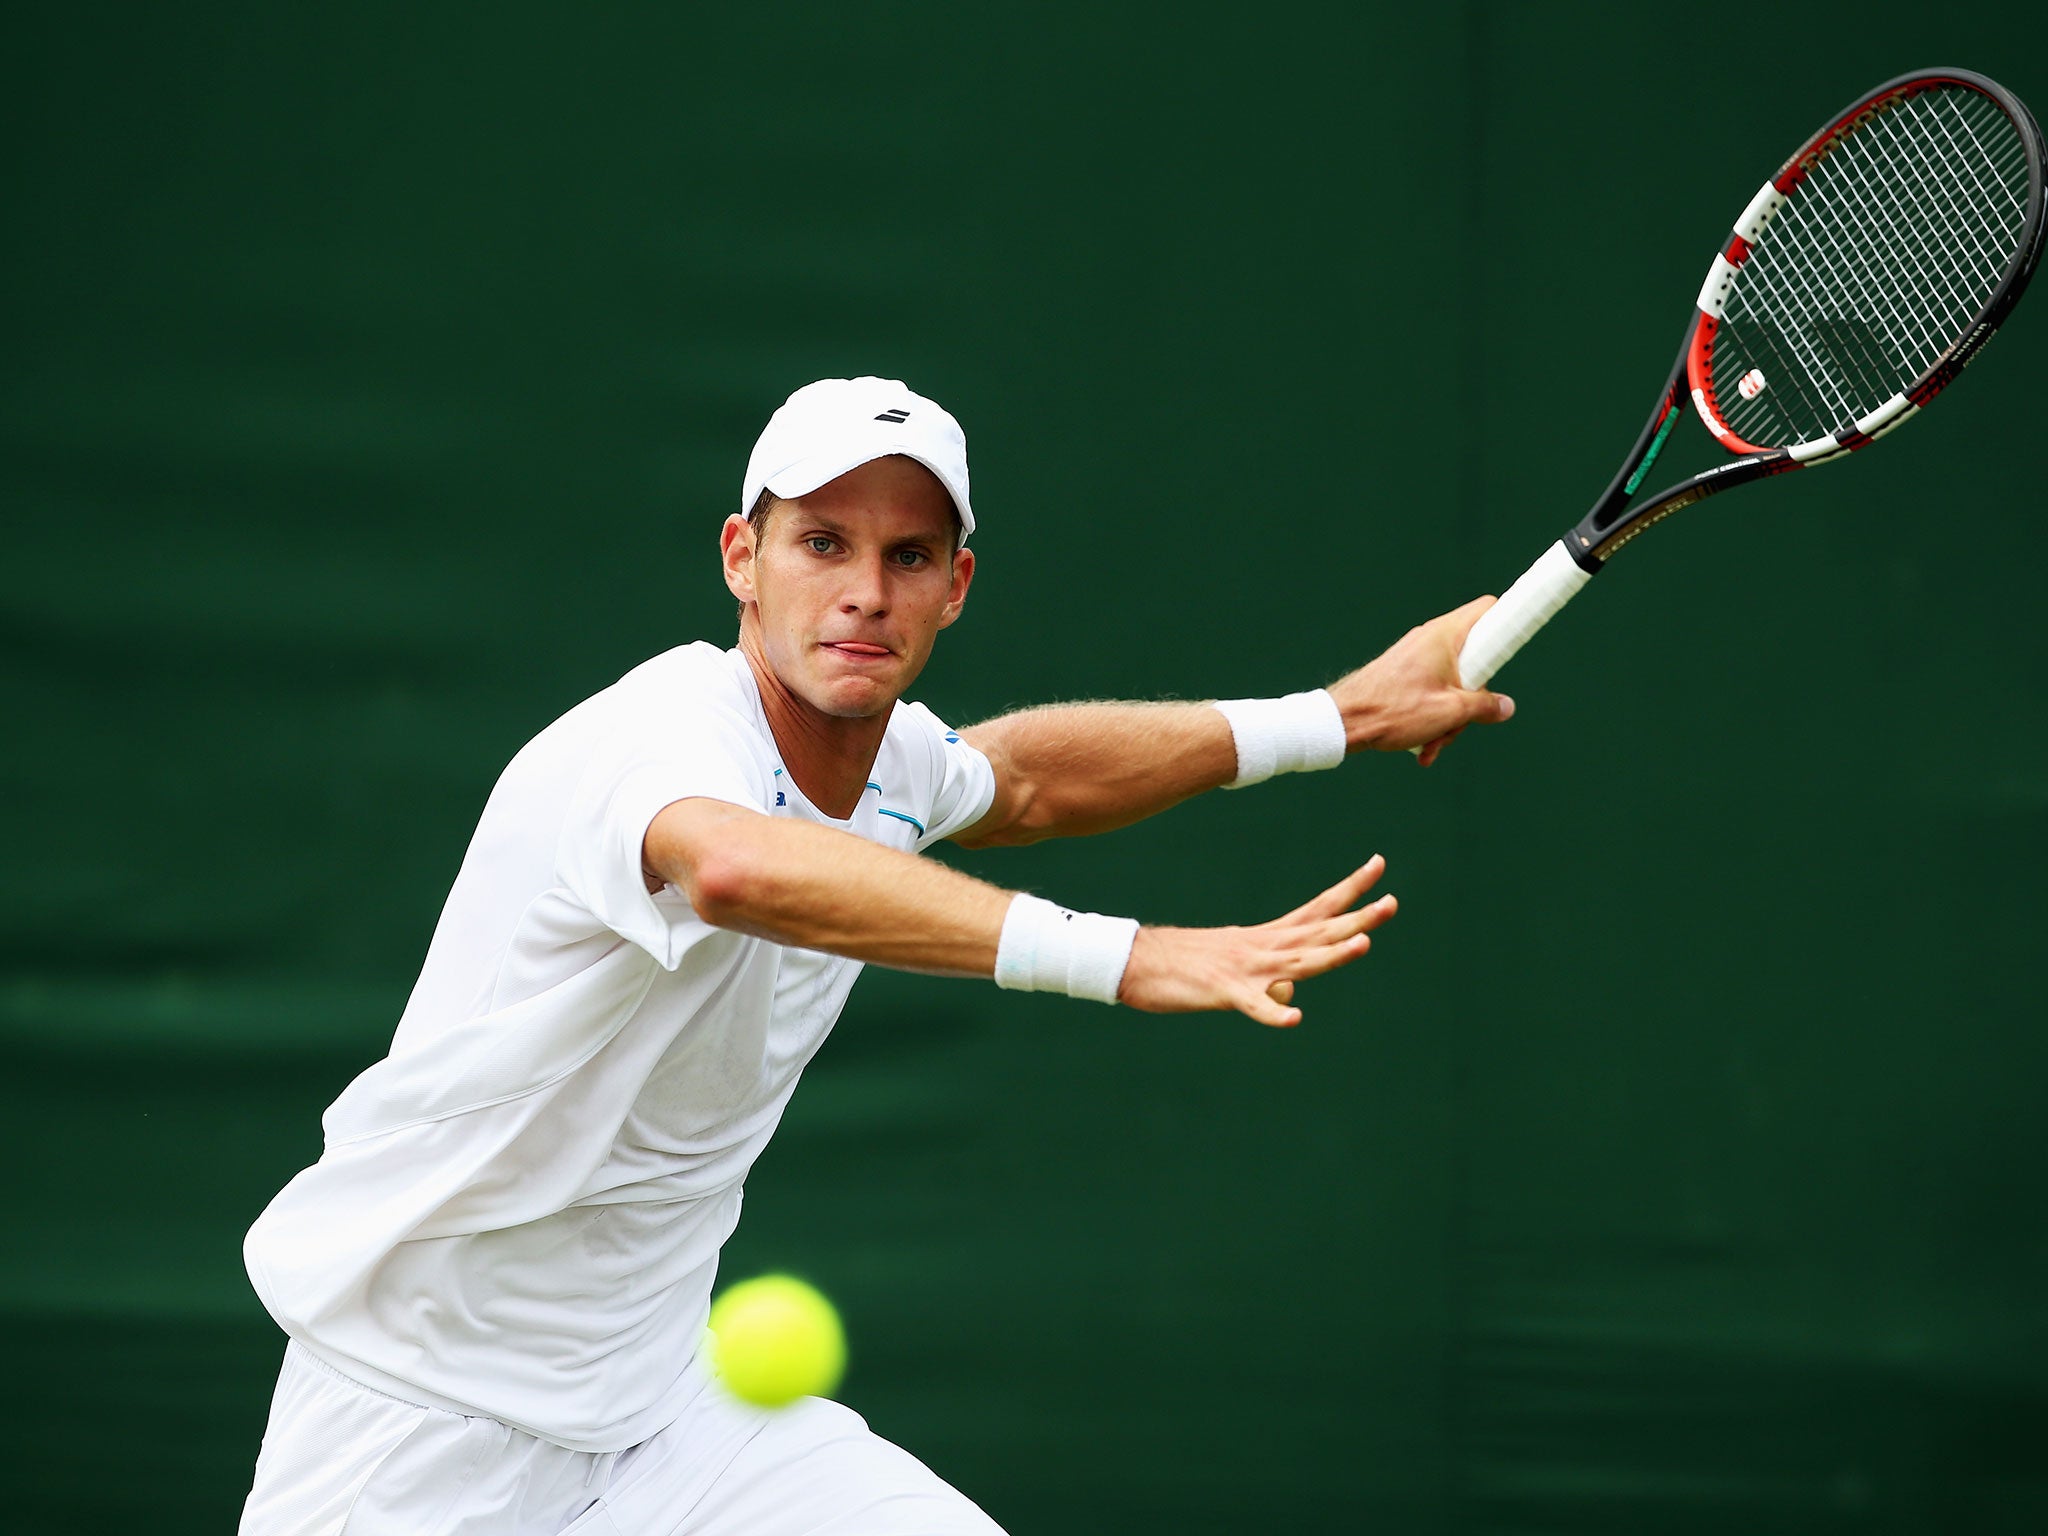 World No 92 Blaz Rola is hoping he doesn't 'poop his pants' against Andy Murray on Wednesday